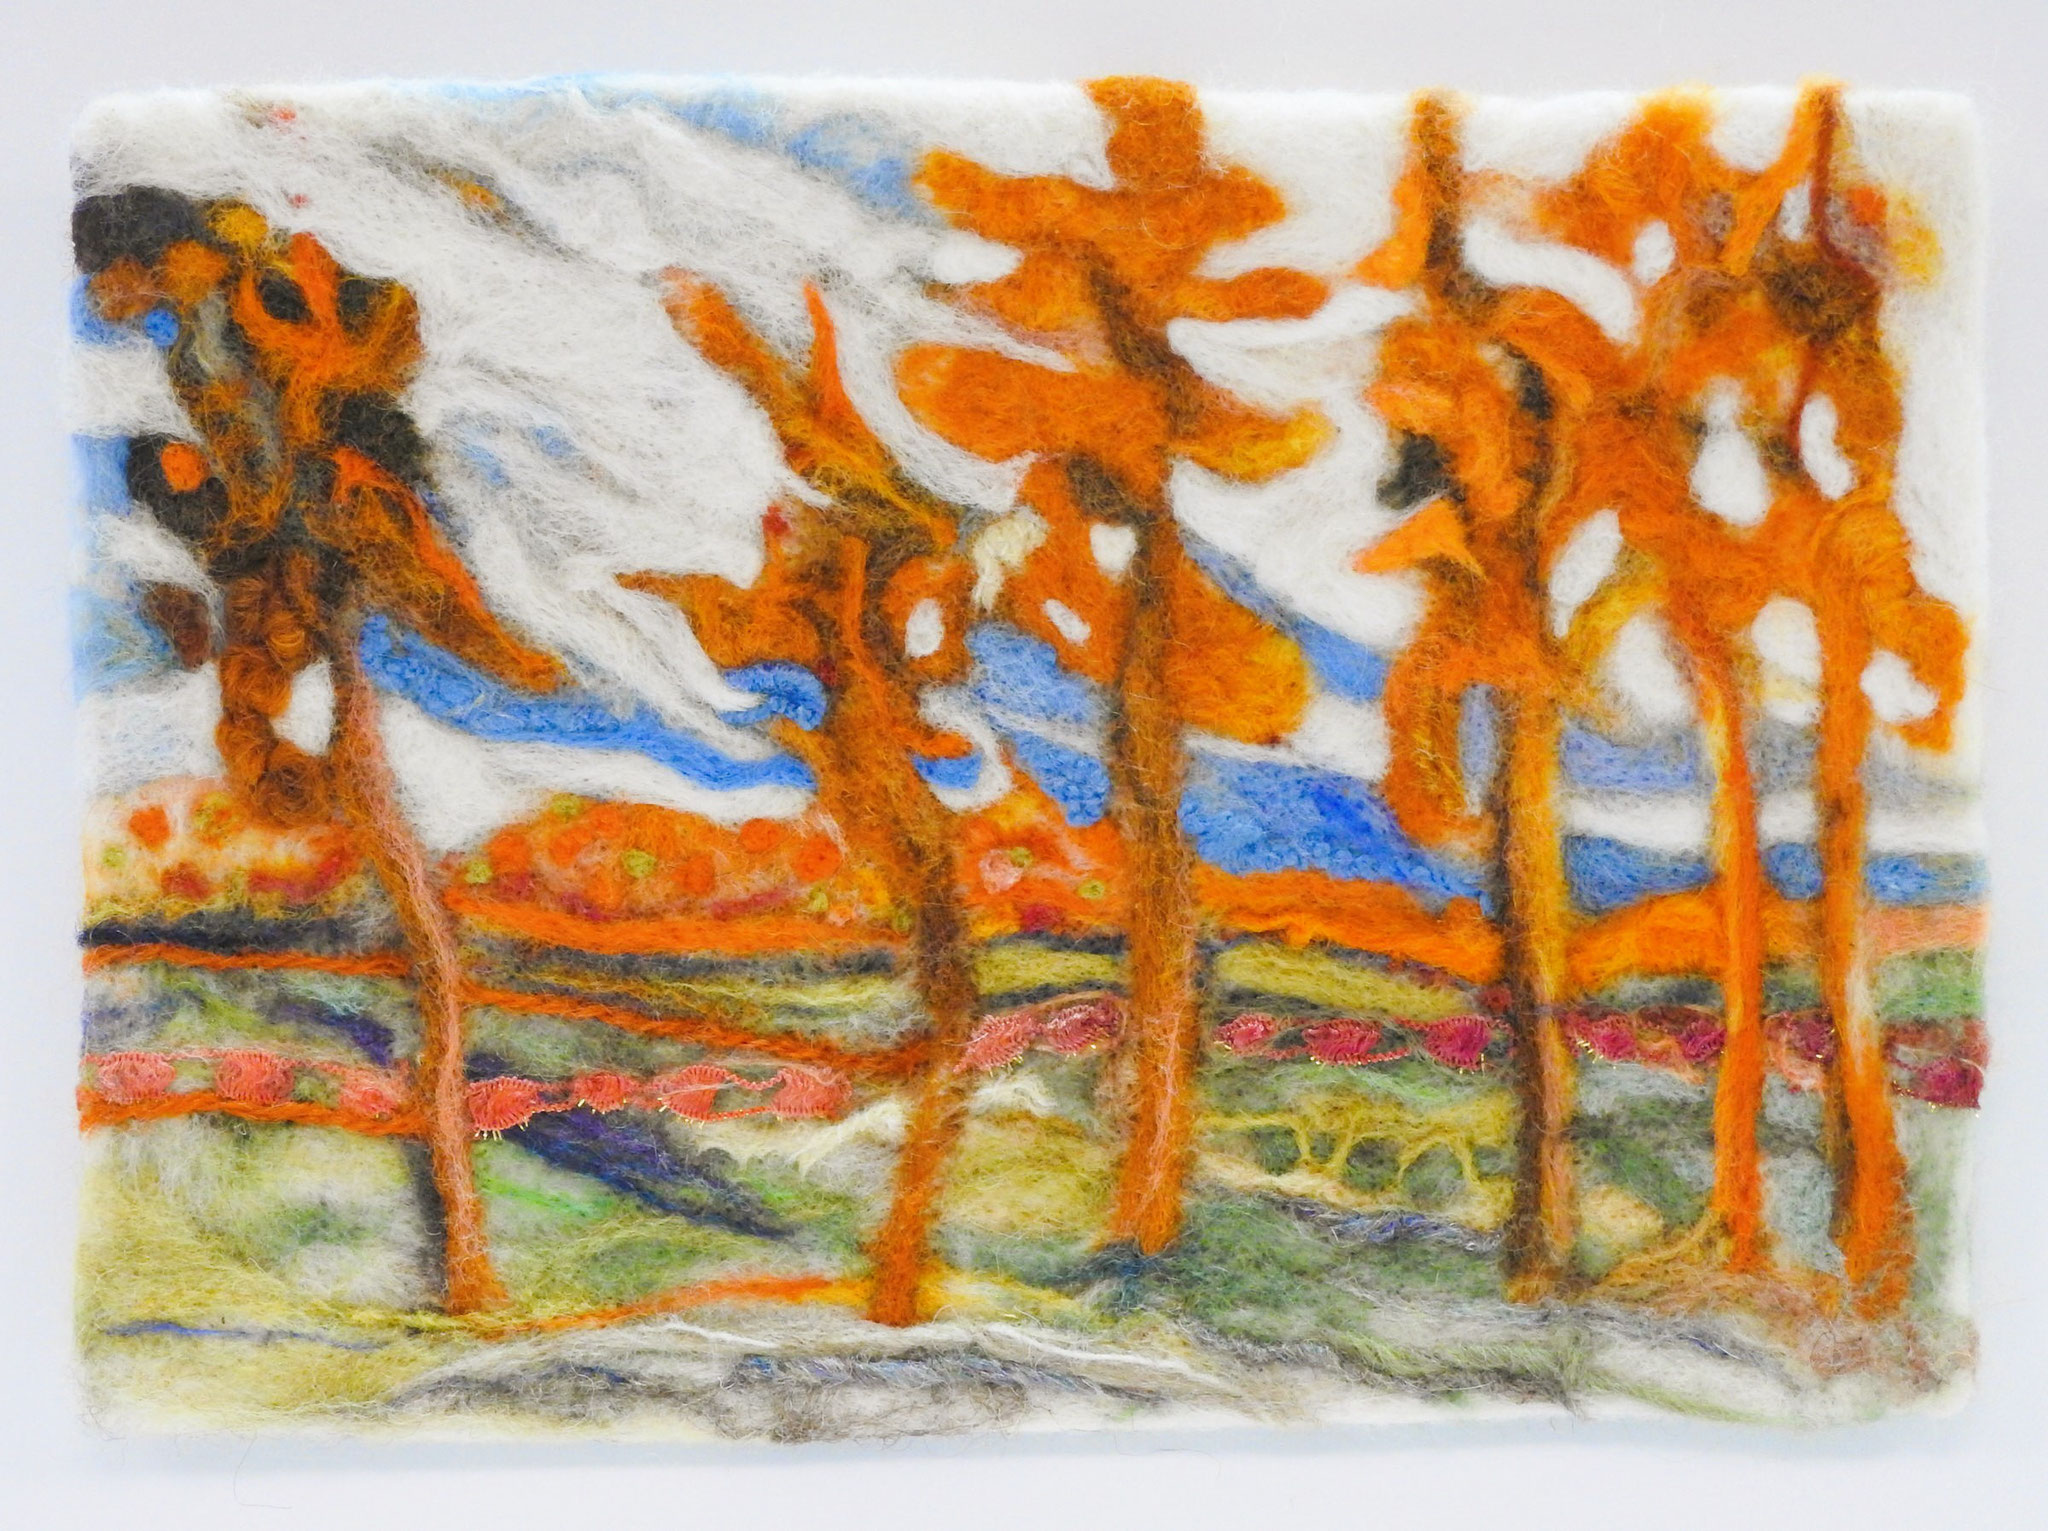 PINES IN THE FALL  11.5 x 13 Needle felting by Brigitte Bere